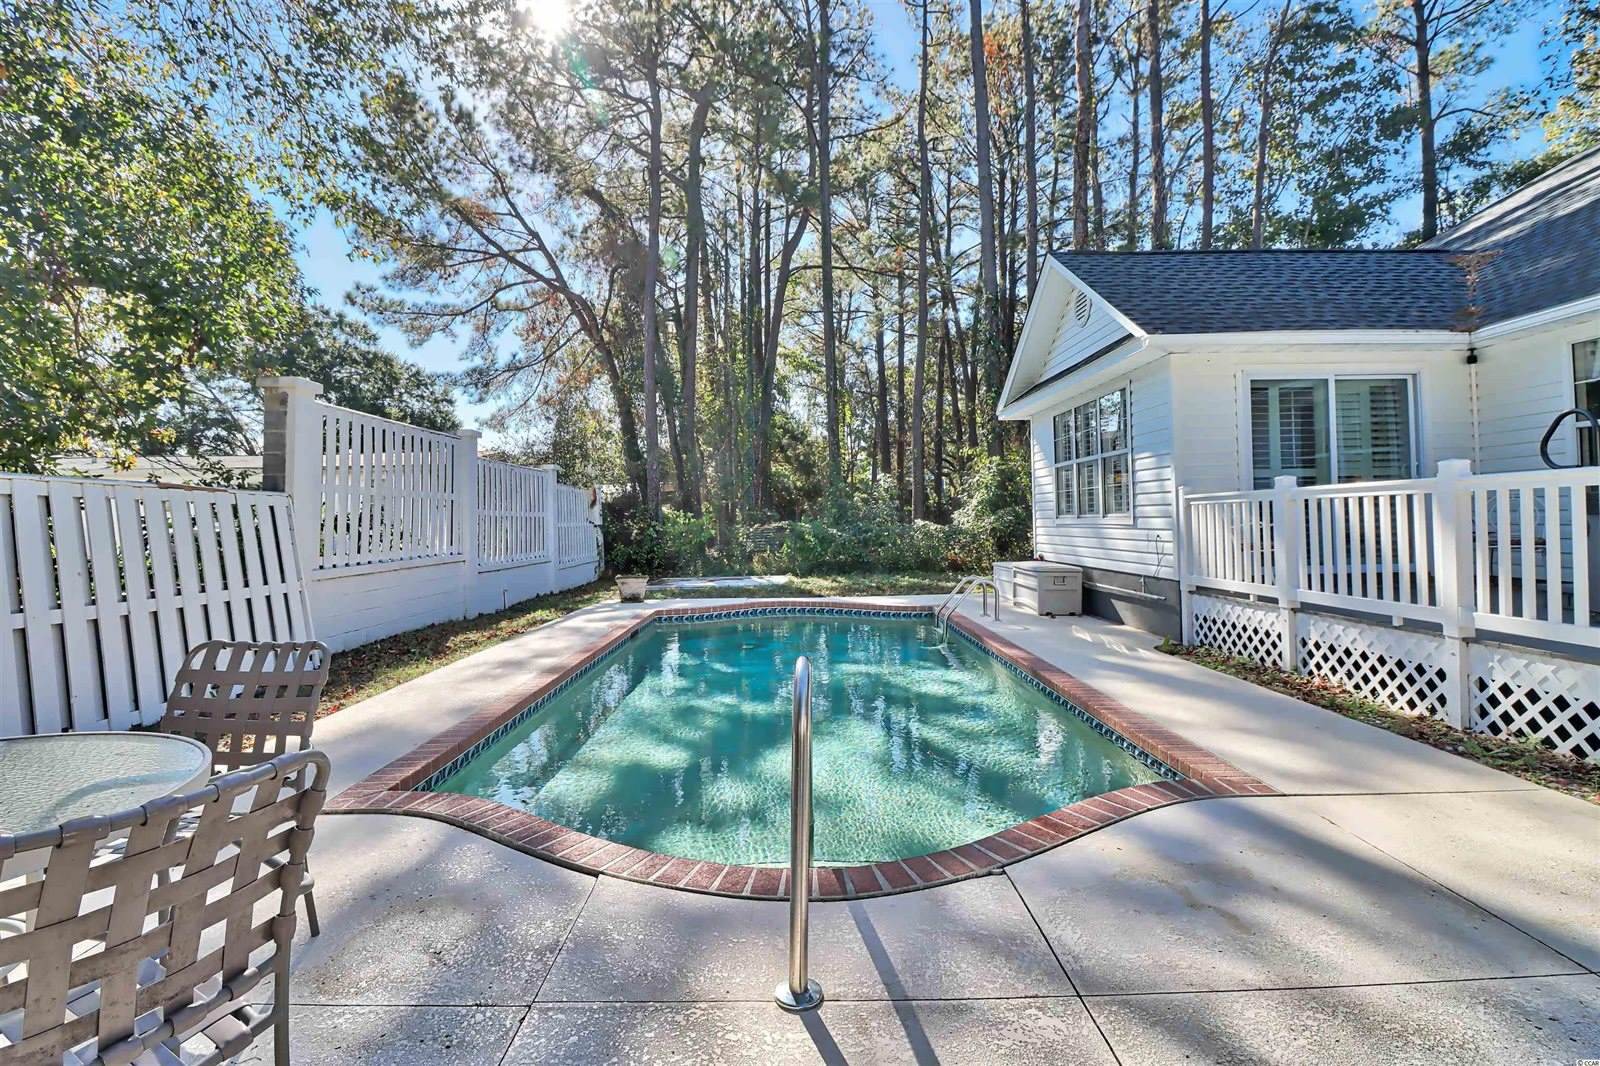 726 Mount Gilead Place Dr., Murrells Inlet, SC 29576